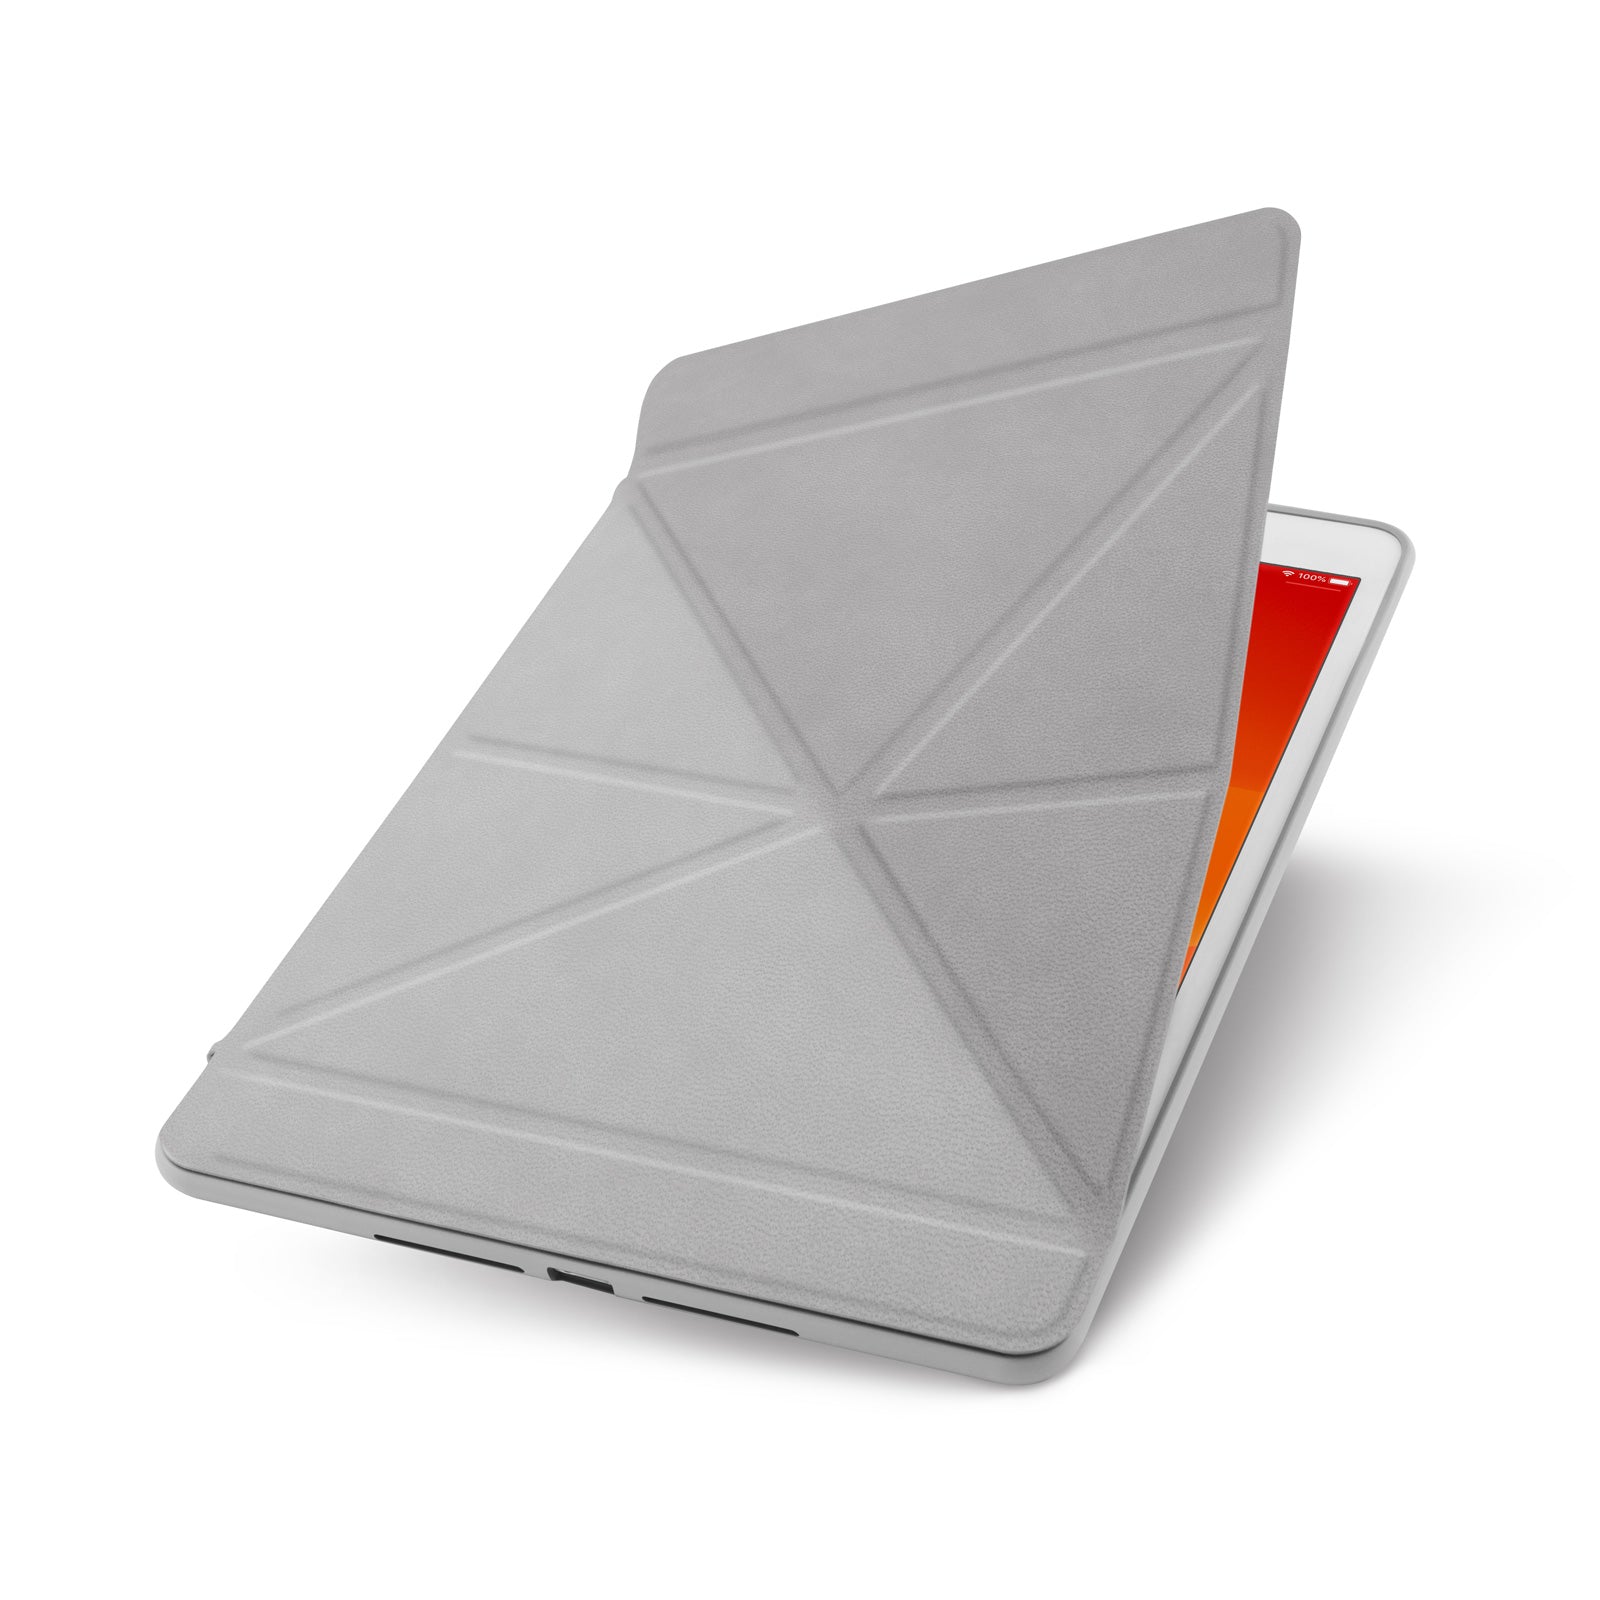 Moshi VersaCover Case with Folding Cover